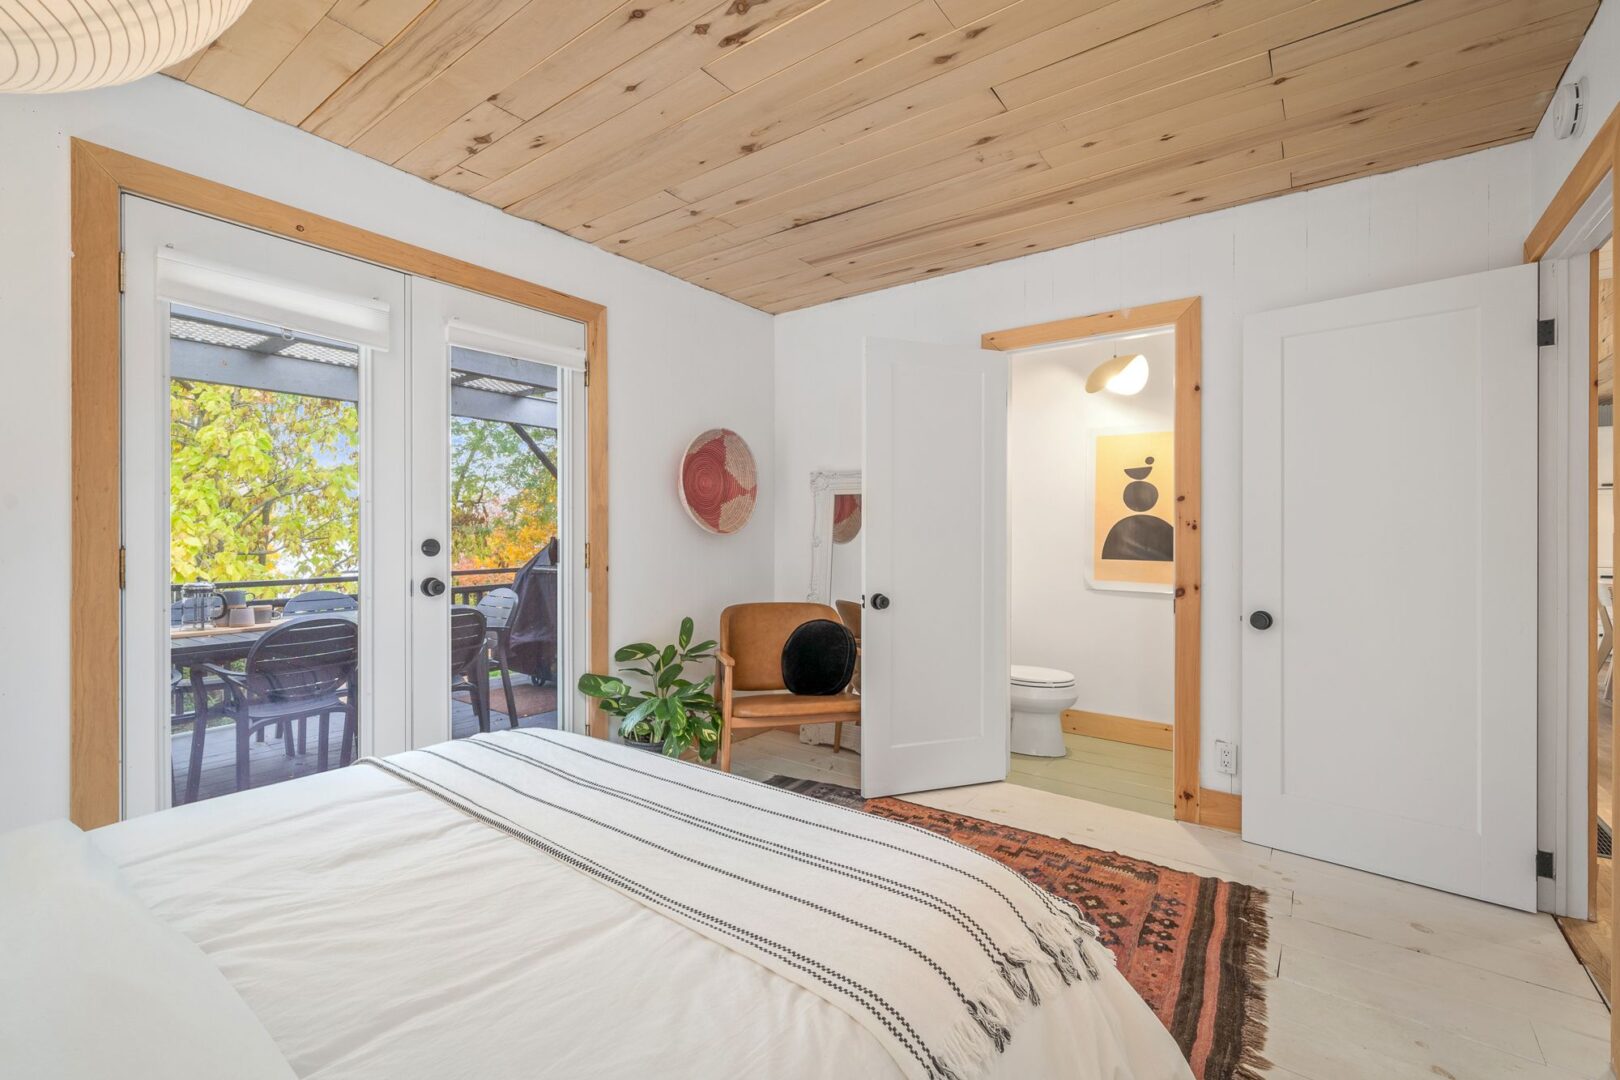 A big, bright bedroom with a large bed, a wood-panelled ceiling, a small ensuite bathroom, and double glass doors leading to a deck.